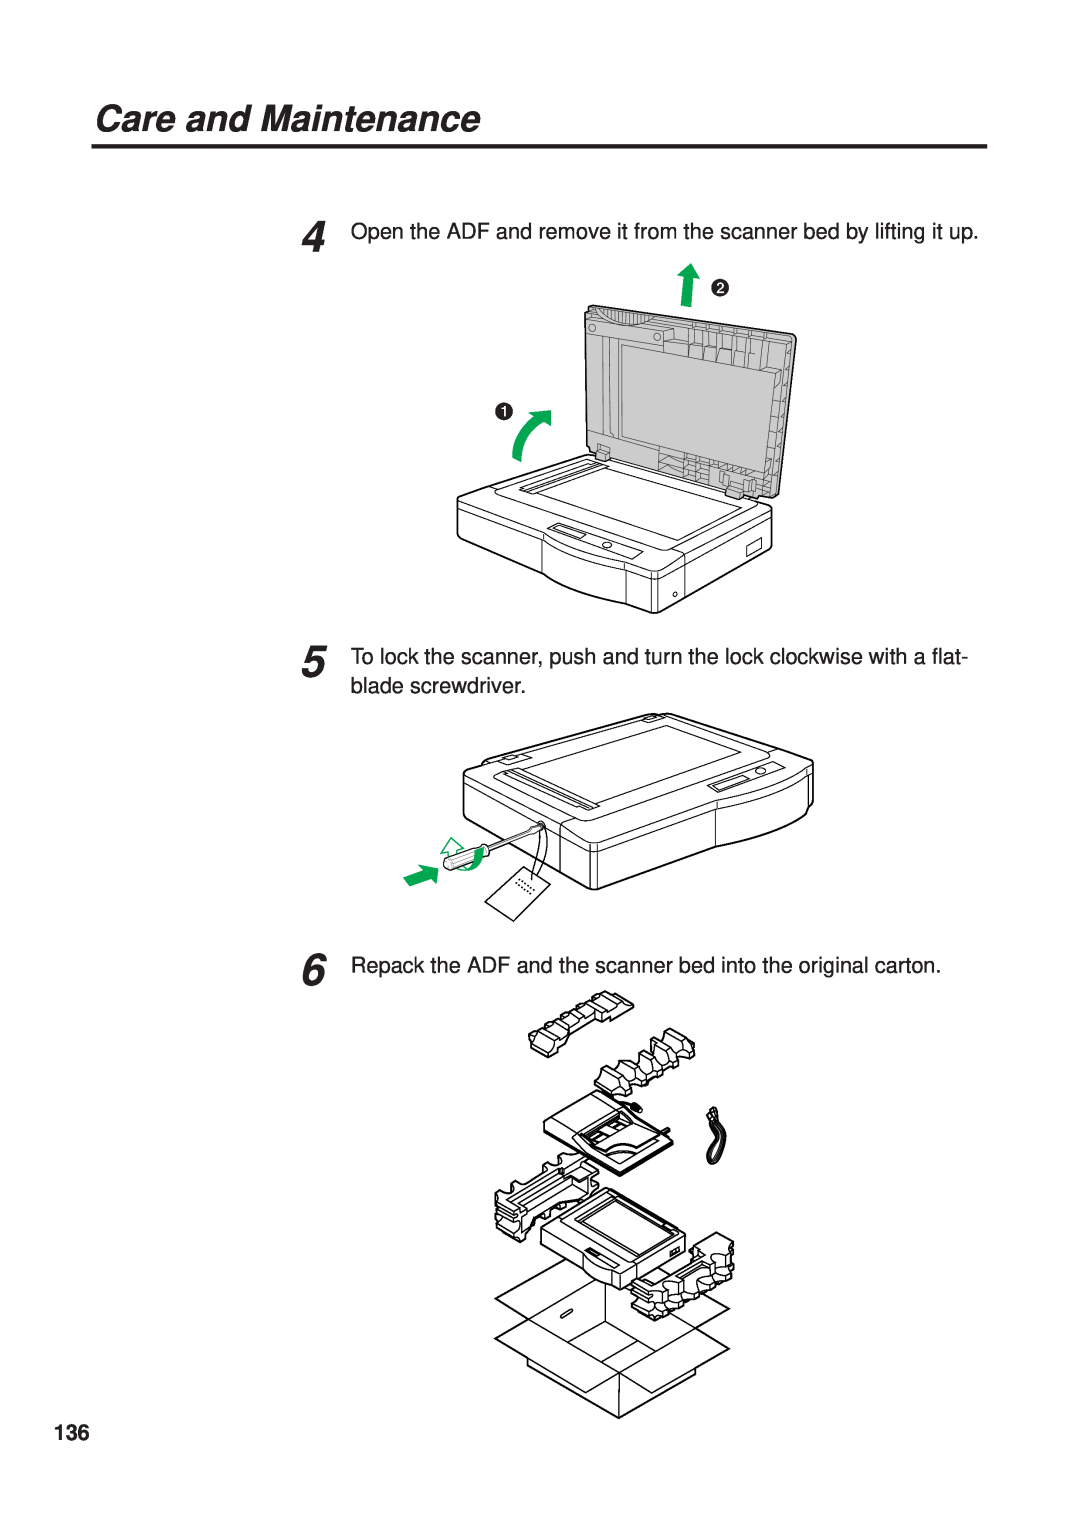 Panasonic KX-PS8000 manual Open the ADF and remove it from the scanner bed by lifting it up, Care and Maintenance 